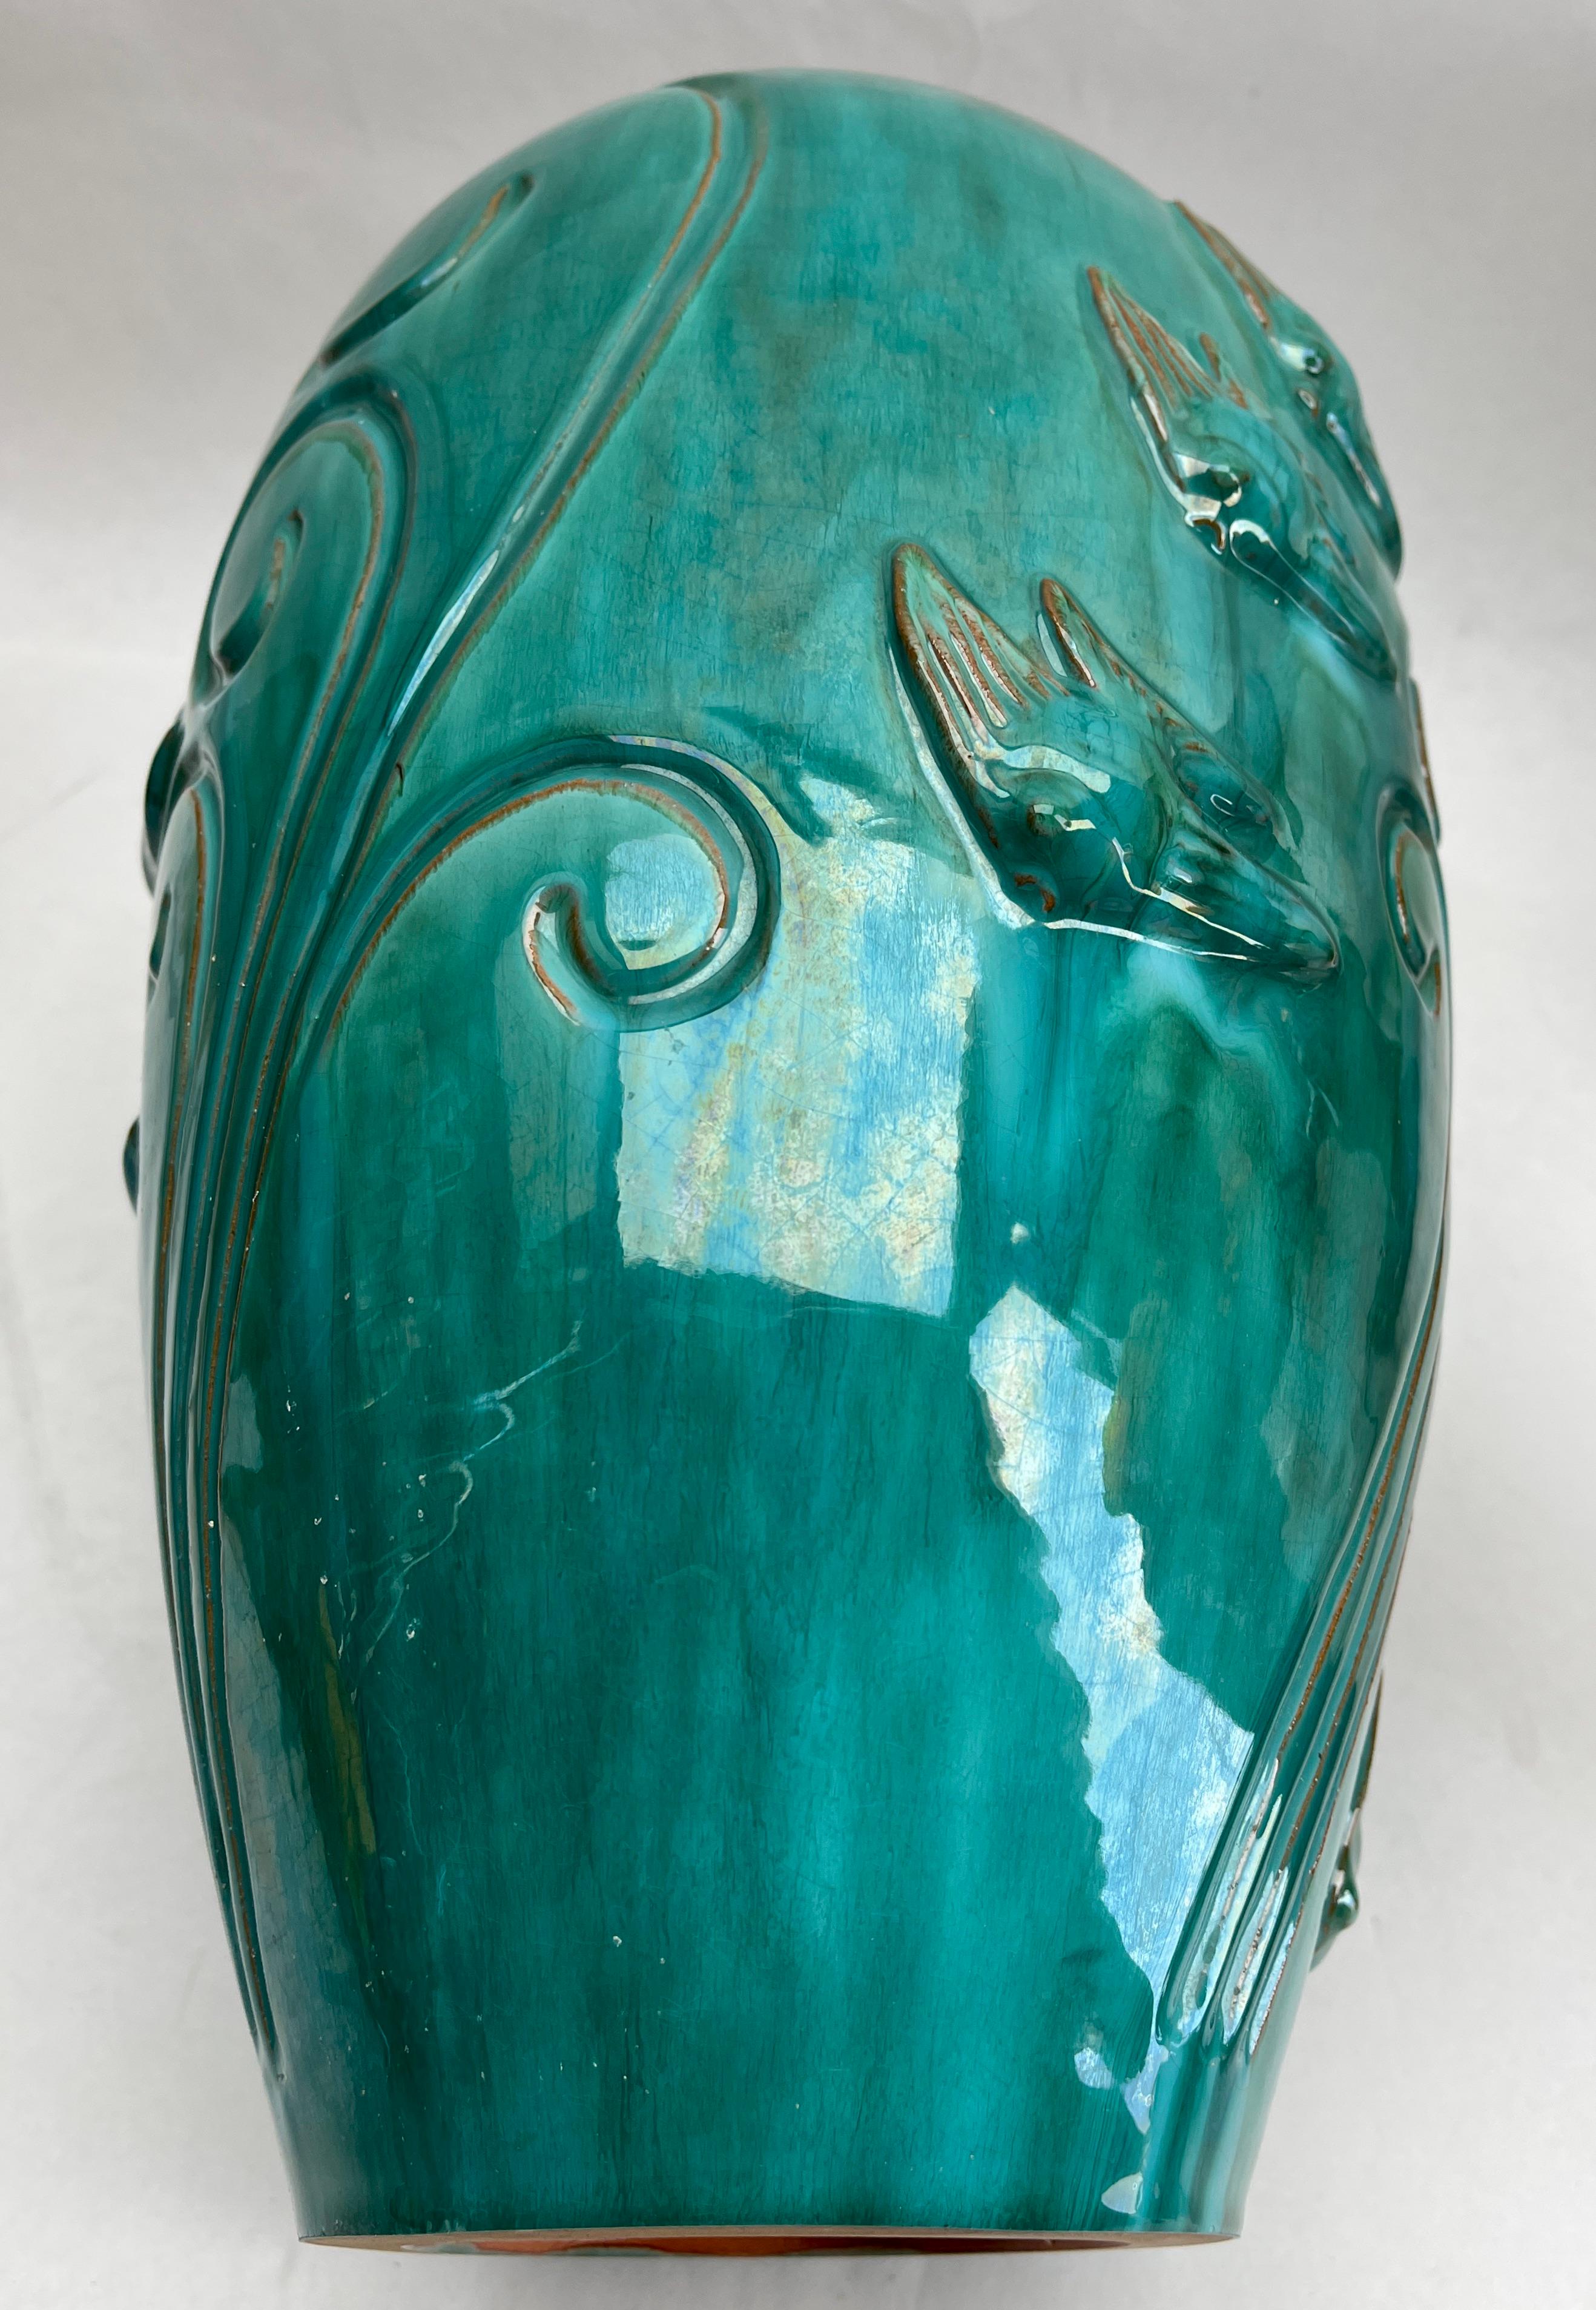 Ceramic Alexandre / Belgium Vase green glazed terracotta decorated with Fish in relief For Sale